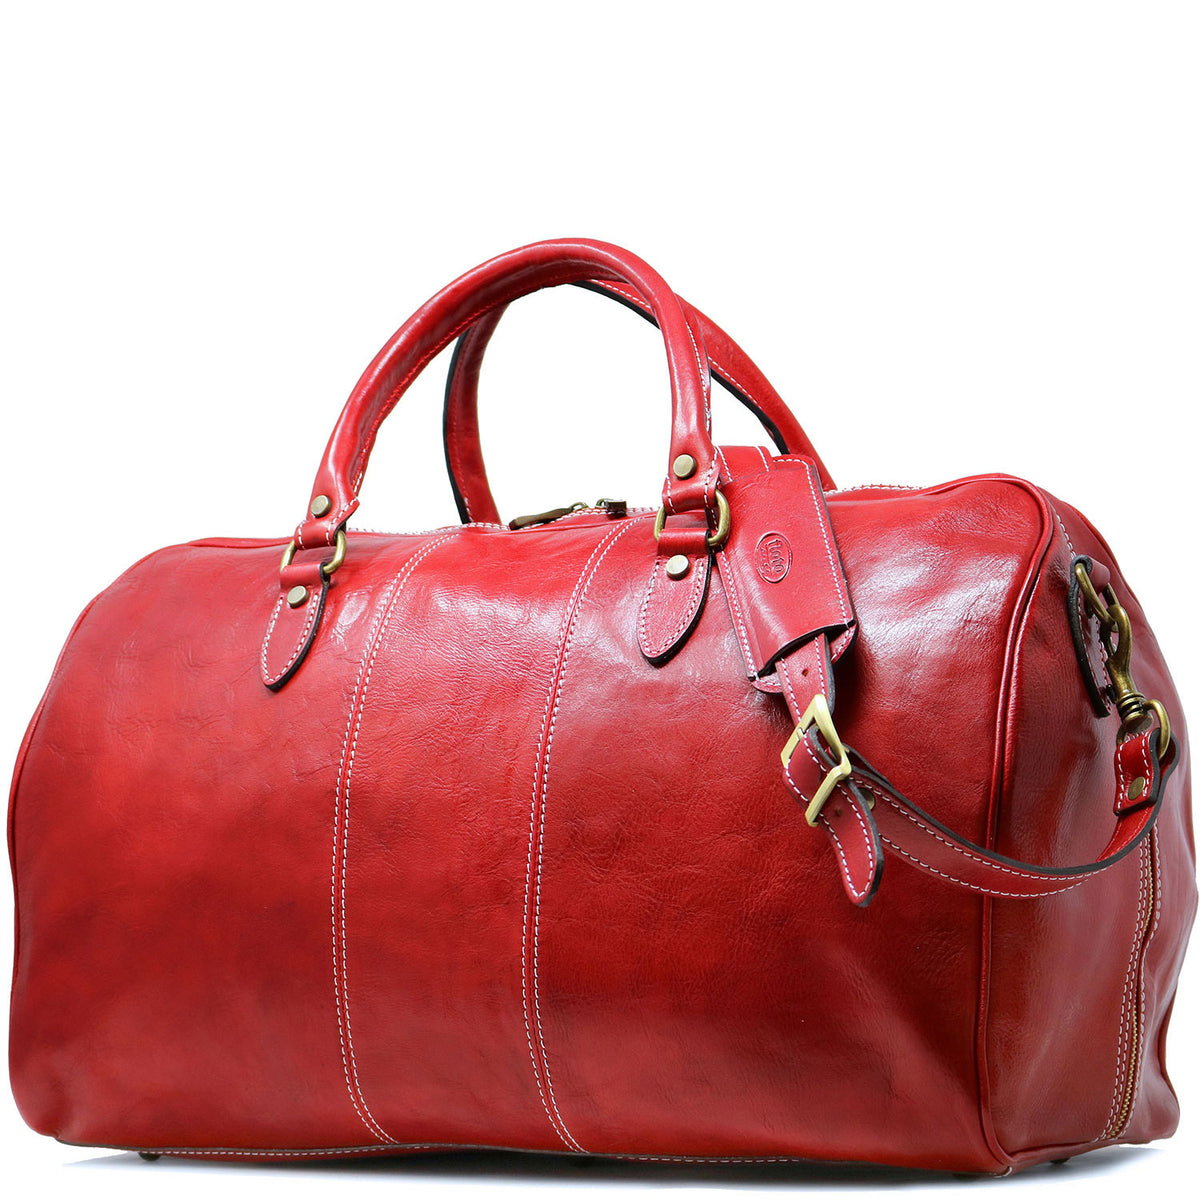 LEATHER TRAVEL BAG - RED